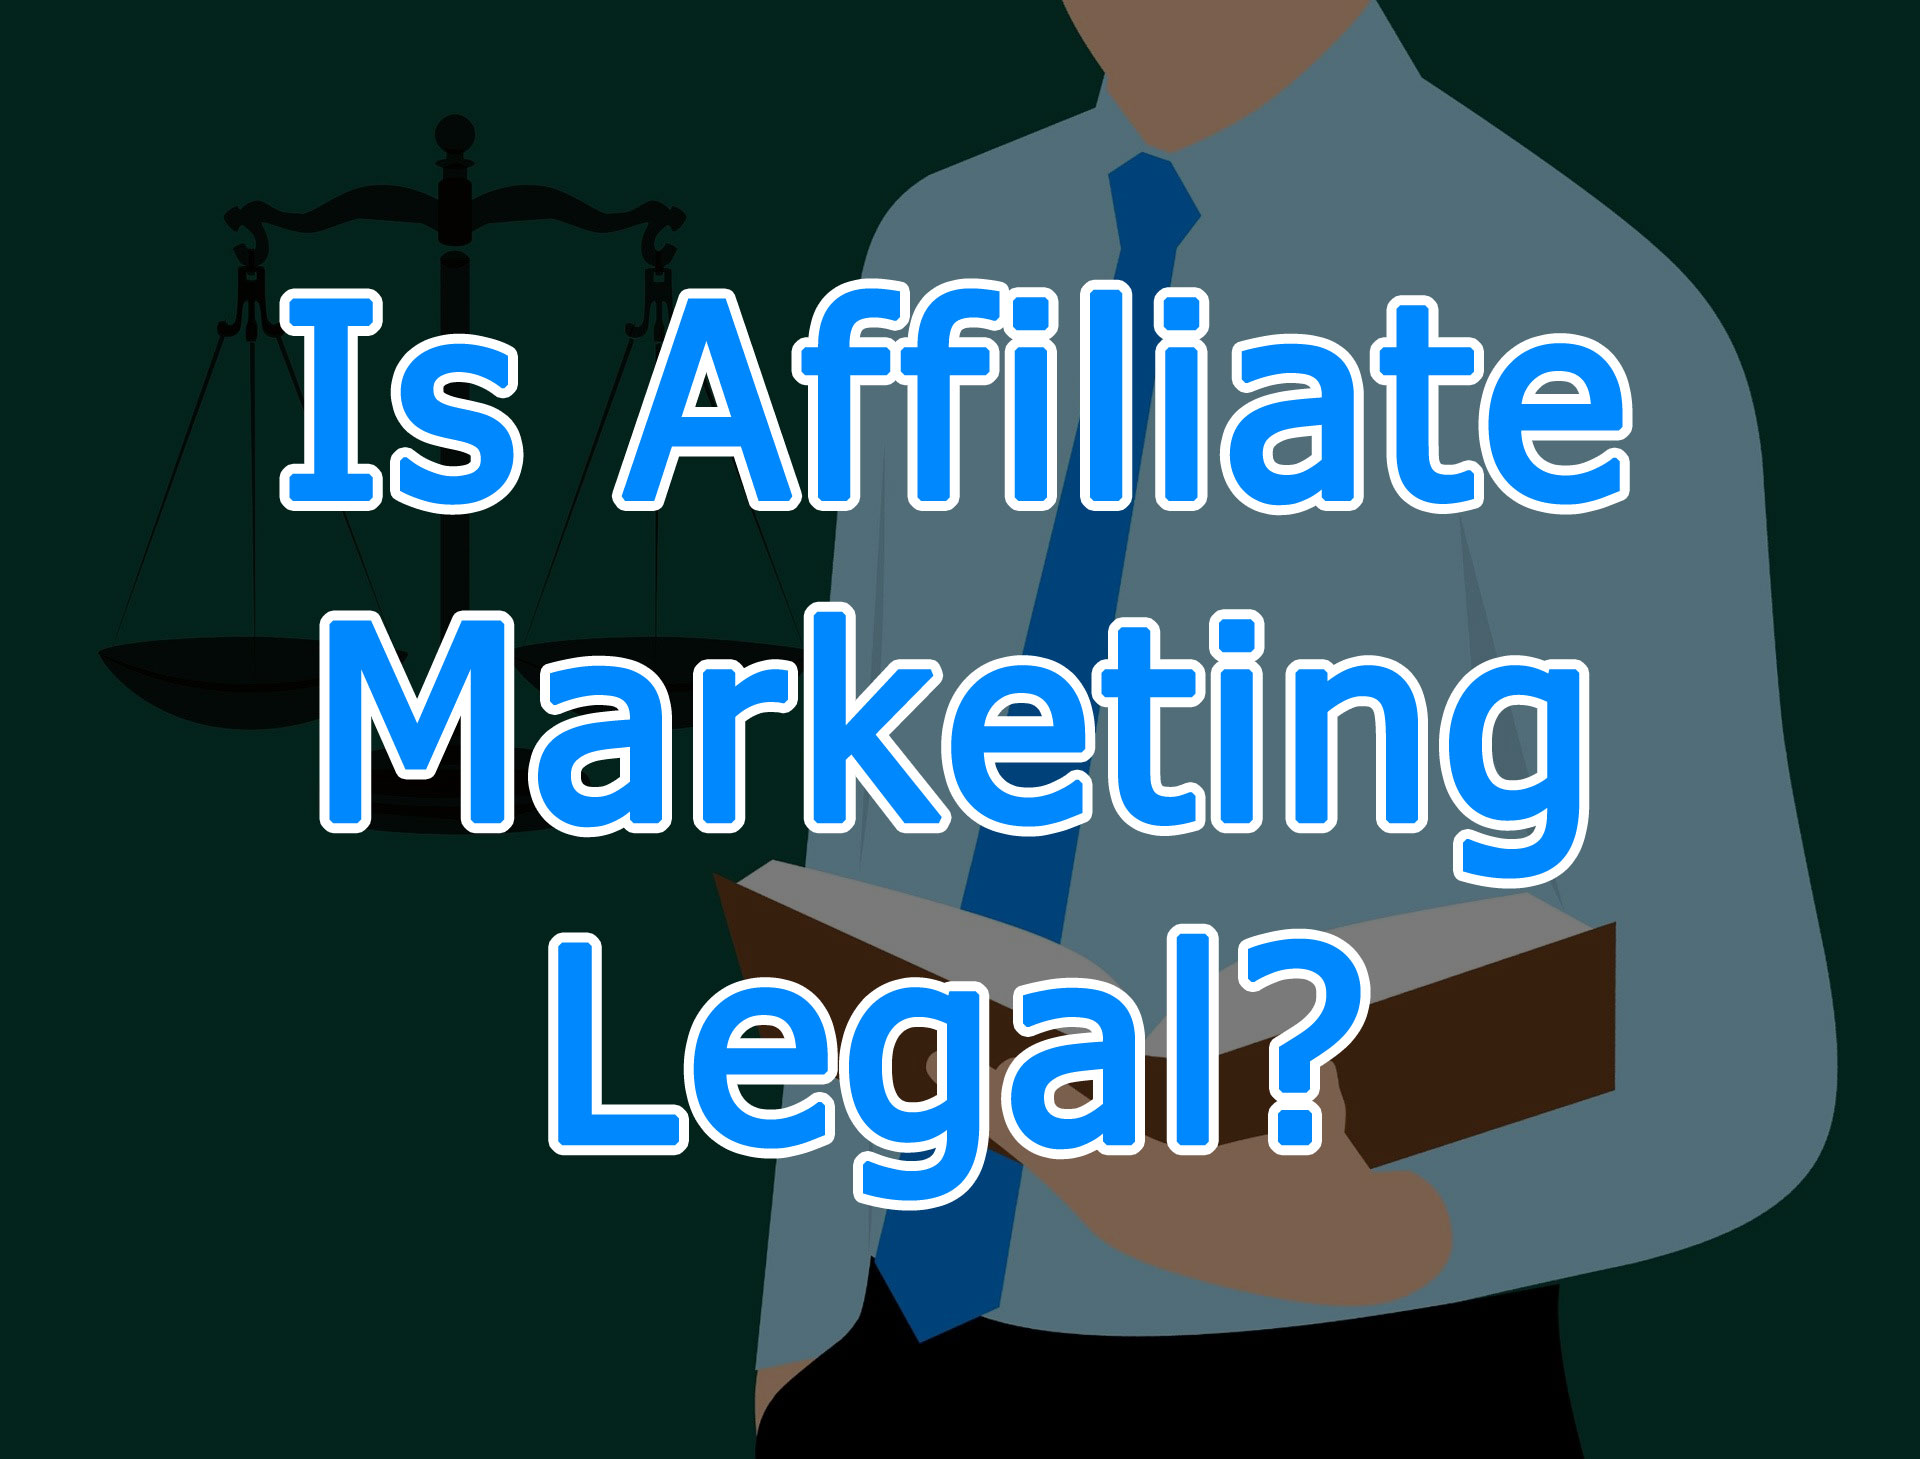 Is Affiliate Marketing Legal? (Yes, Providing You Do It The Right Way